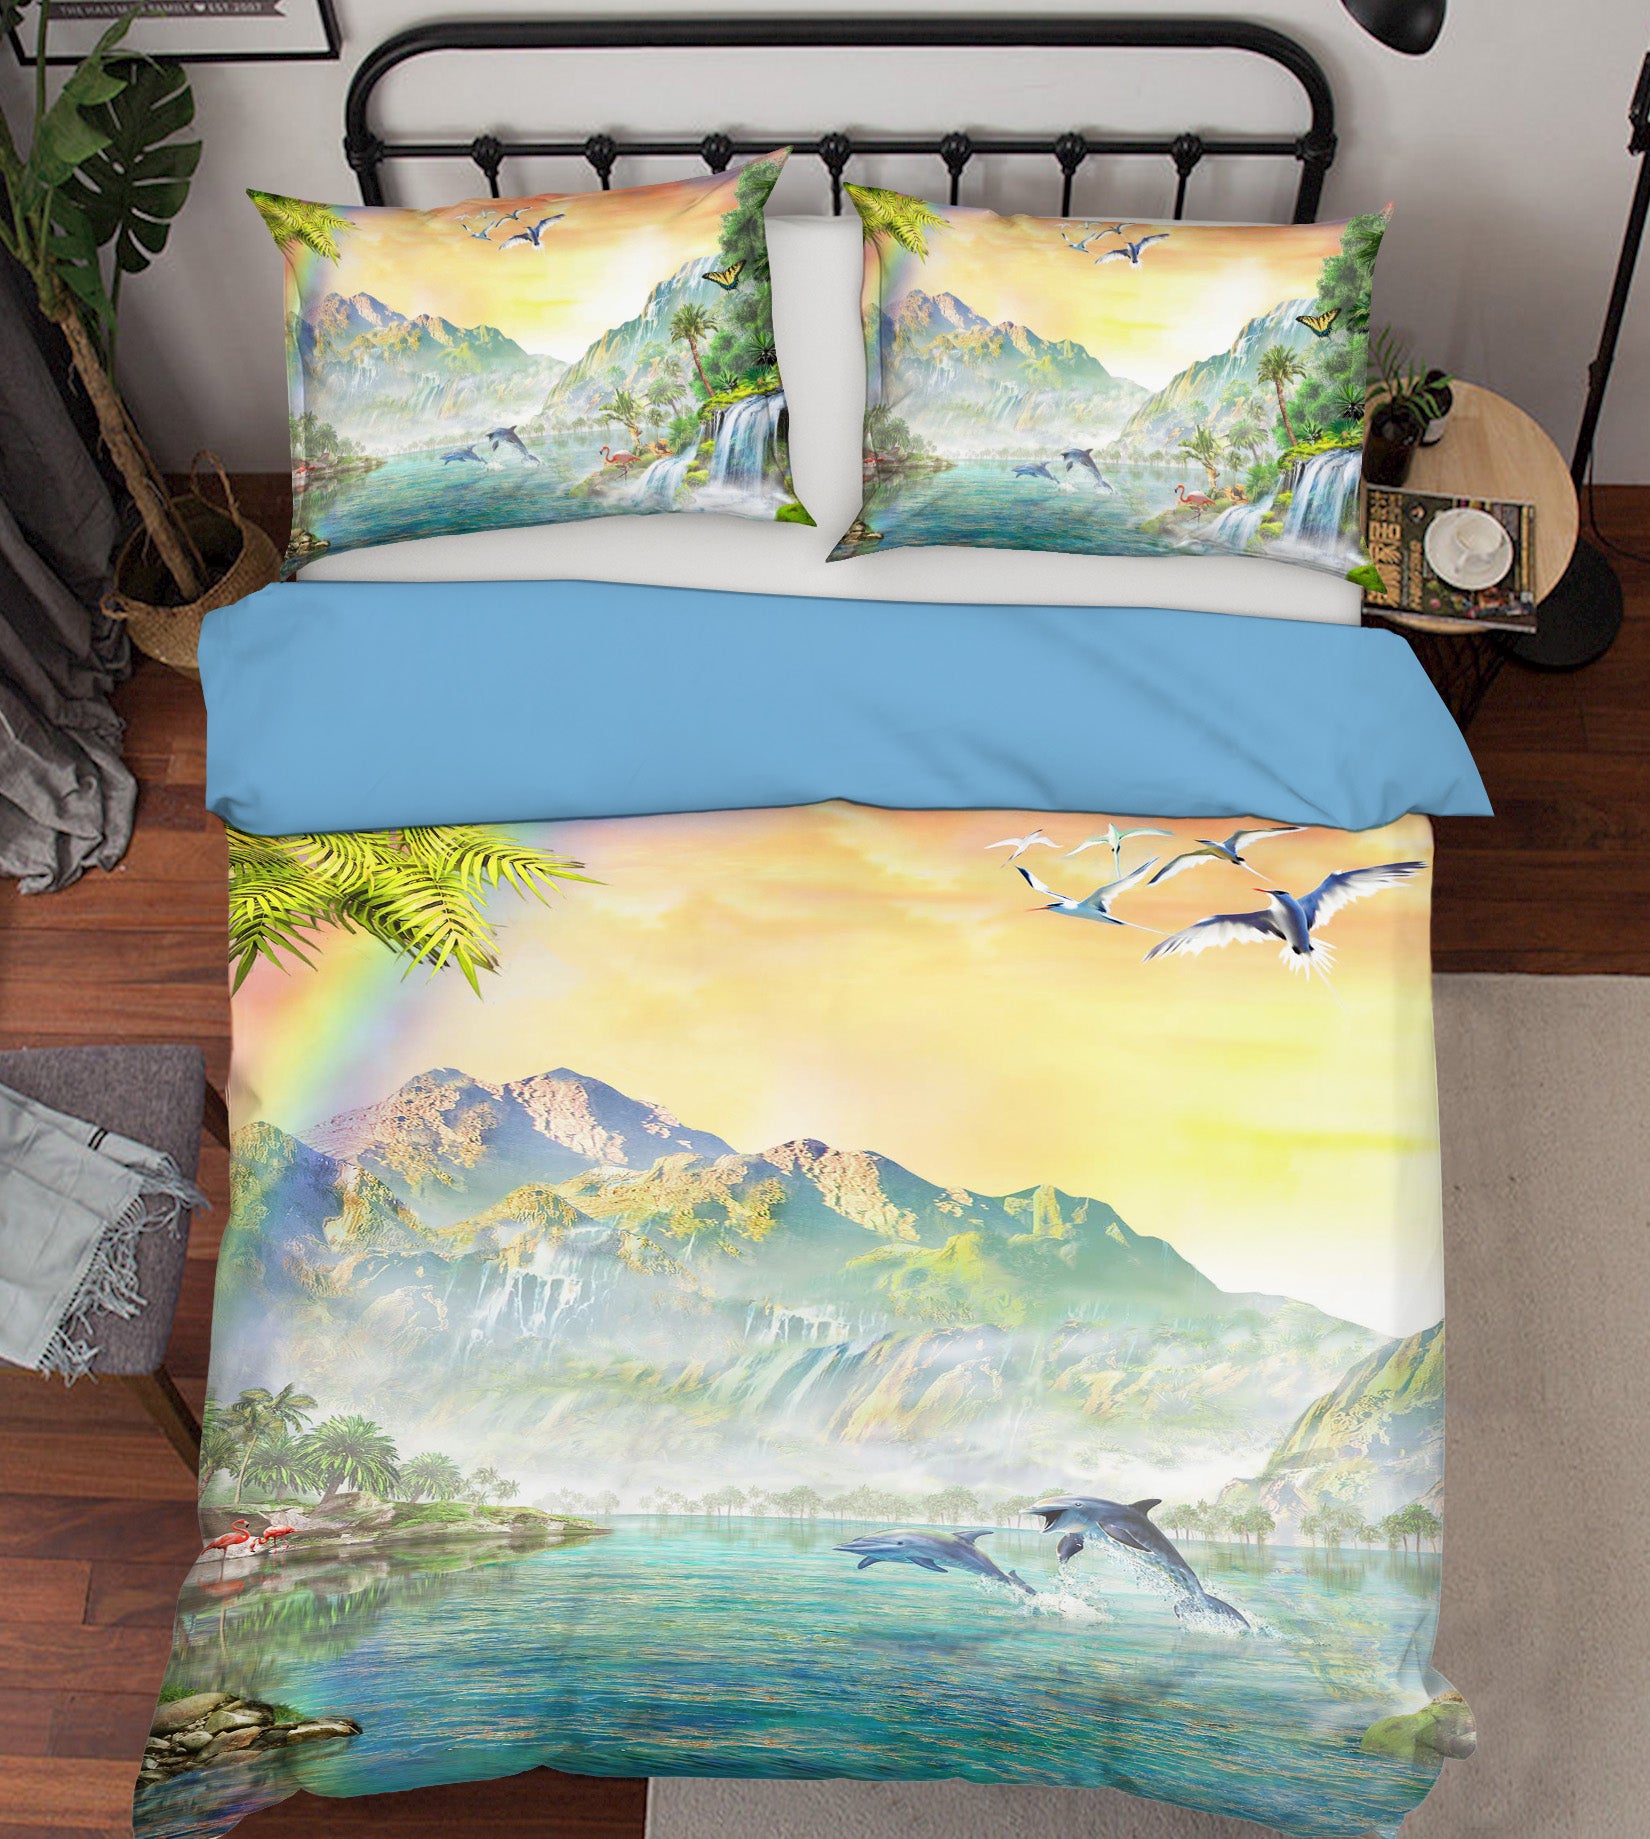 3D Canyon Rainbow 2118 Adrian Chesterman Bedding Bed Pillowcases Quilt